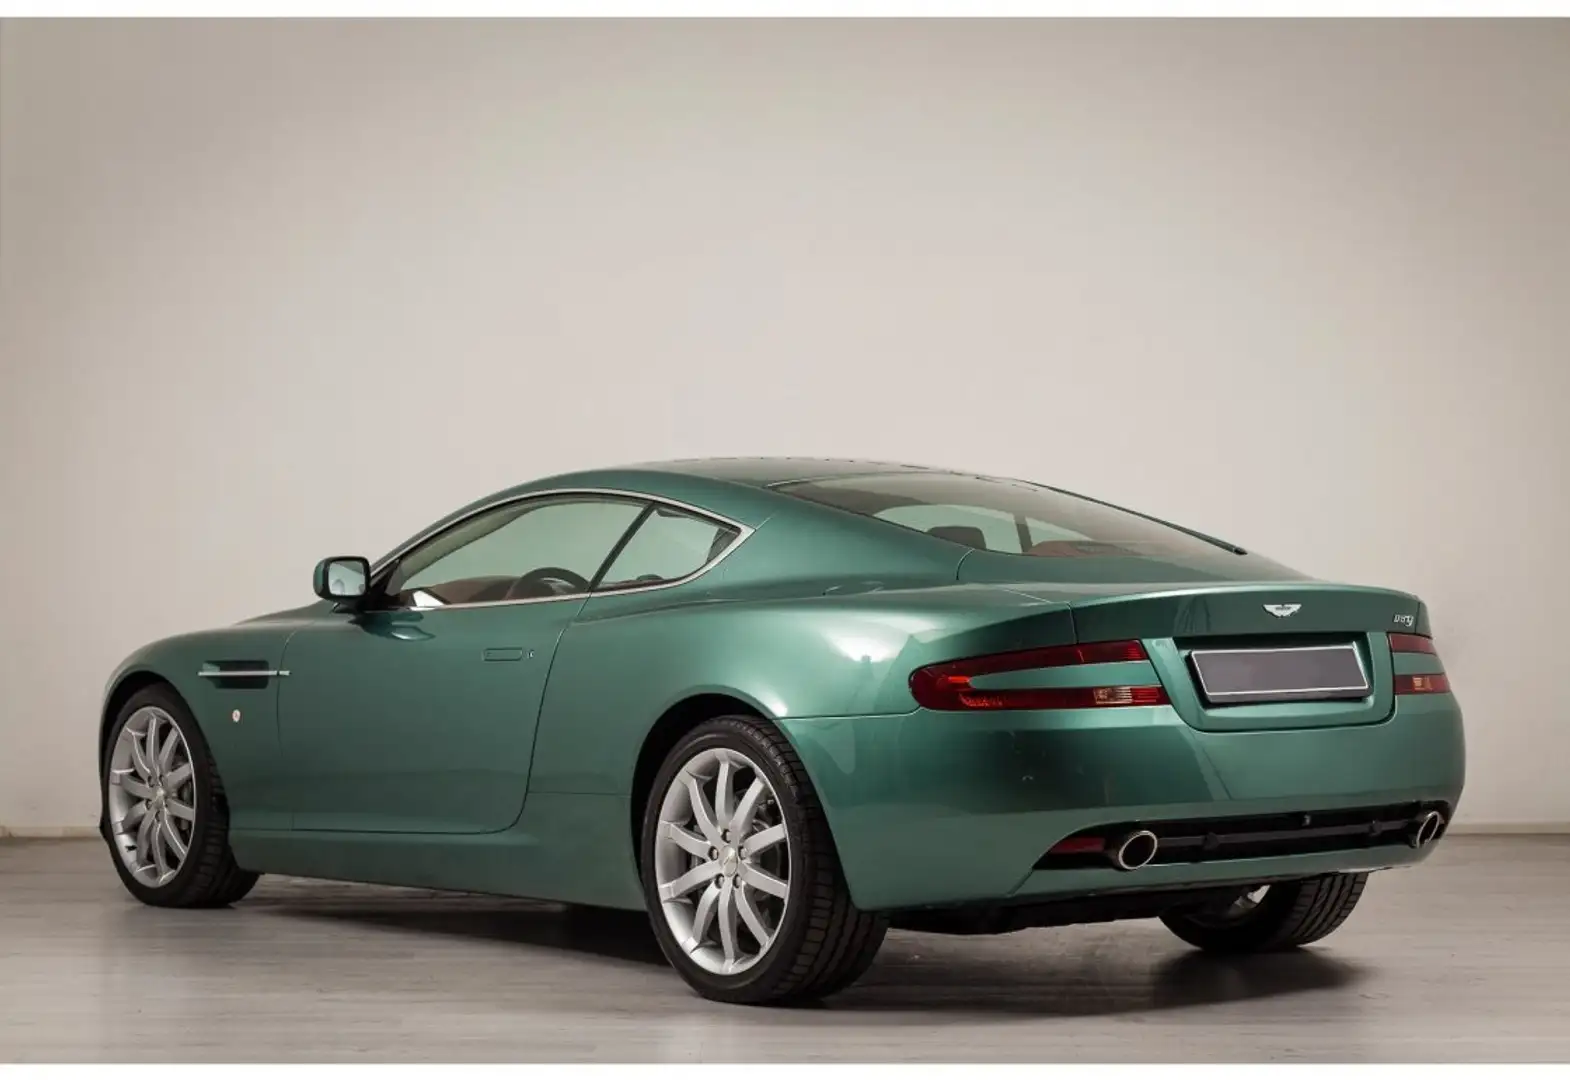 Aston Martin DB9 DB9 Coupe Touchtronic Verde - 2